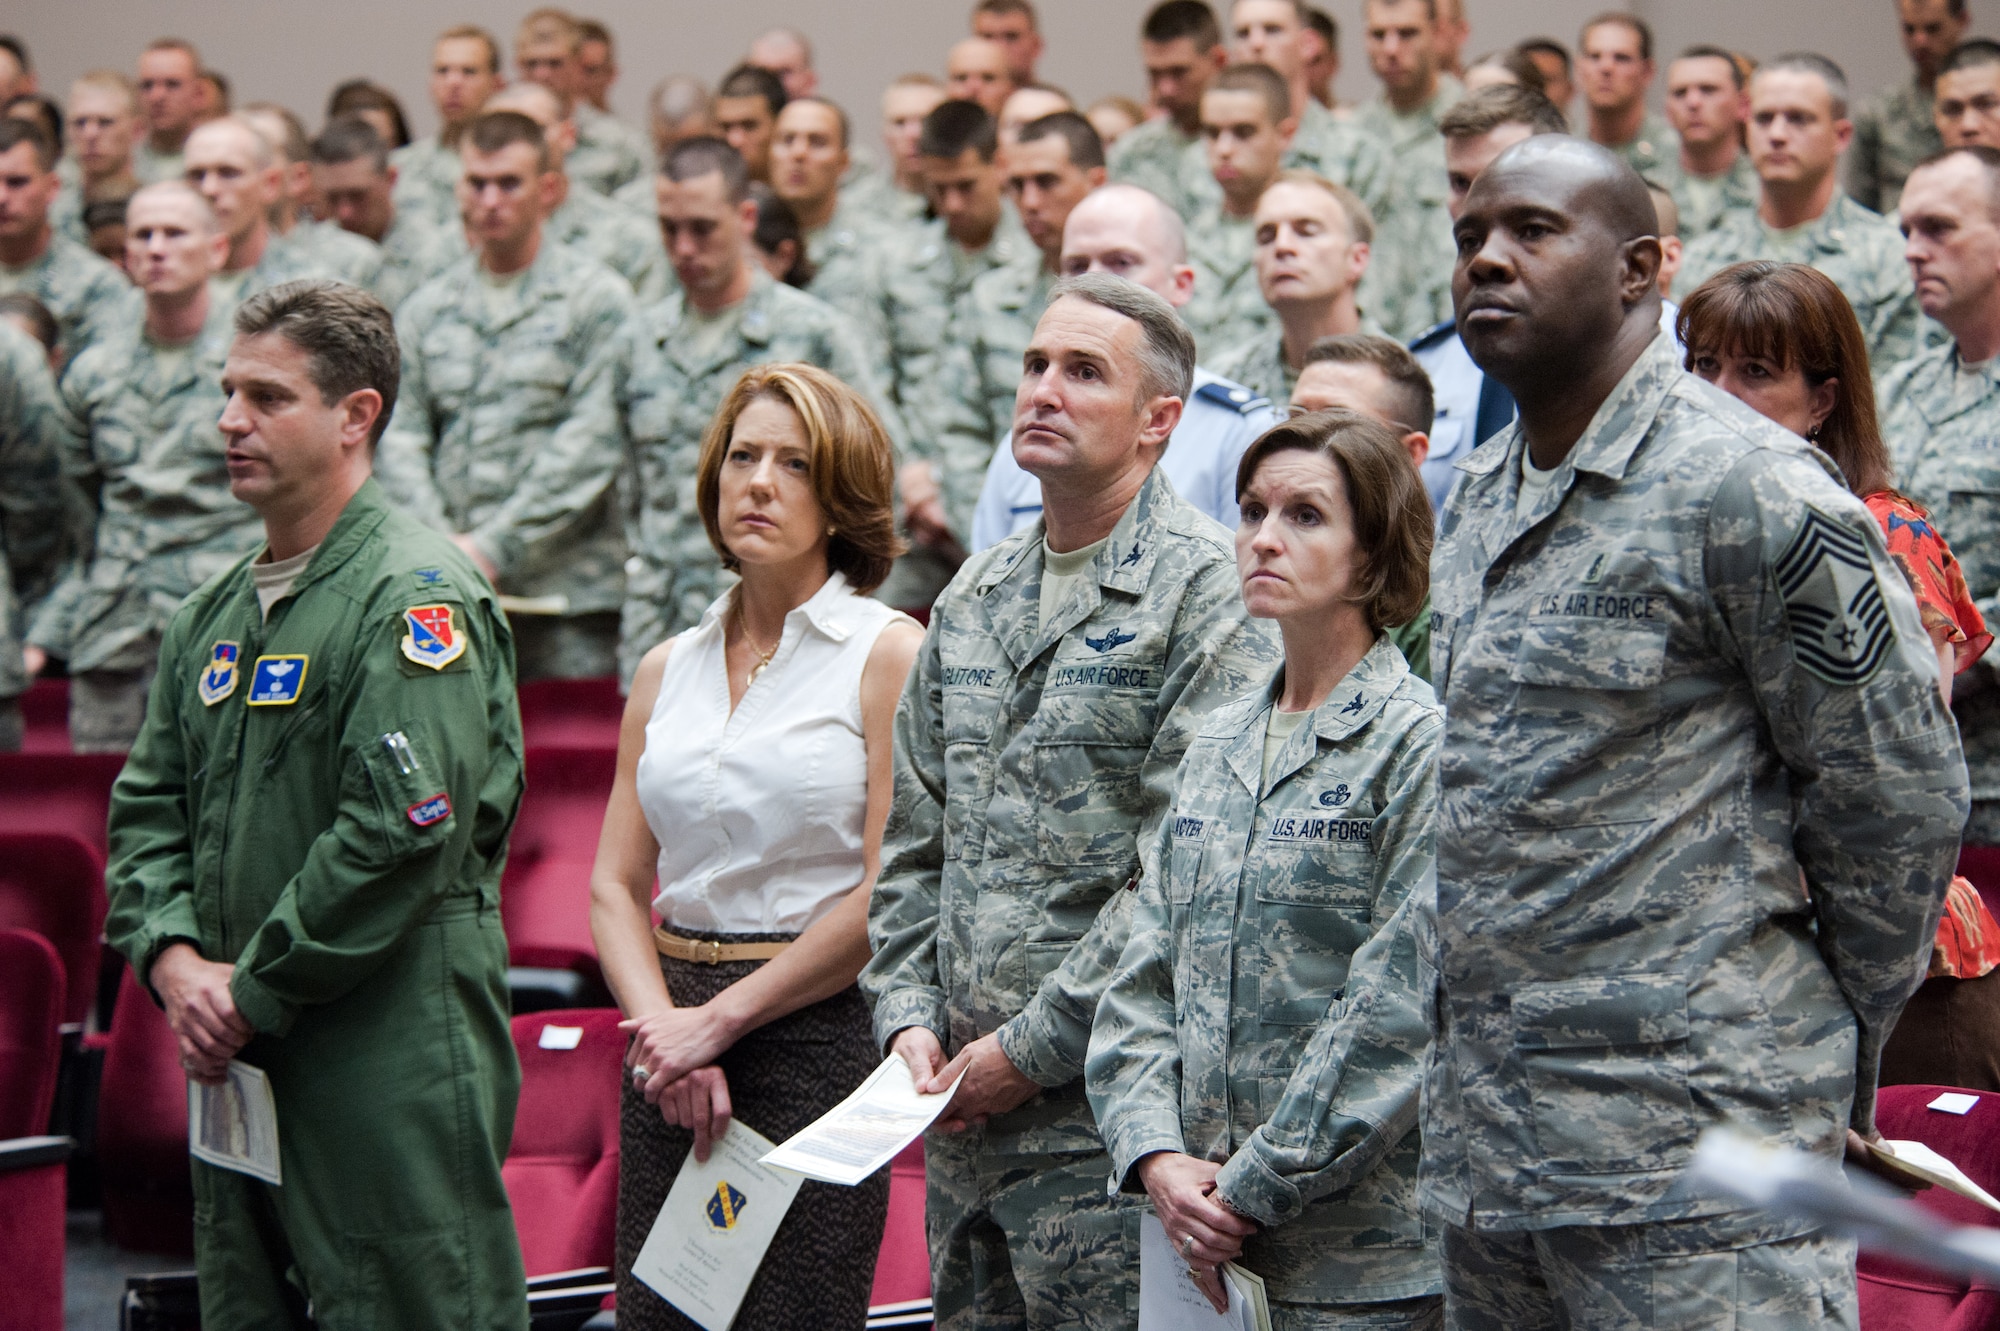 The audience stands during a Holocaust Days of Remembrance commemoration event held April 18 at the Officer Training School. Attendees included, front row from left, Col. David Cohen, the Air University’s director of staff; Sandi Killough, spouse of 42nd Air Base Wing commander Col. Brian Killough; Col. Thomas Coglitore, OTS commander, Col. Susan Schlacter, 42nd Air Base Wing vice commander and Chief Master Sgt. Cornell Johnson, 42nd Medical Group superintendent. (Air Force photo by Melanie Rodgers Cox)